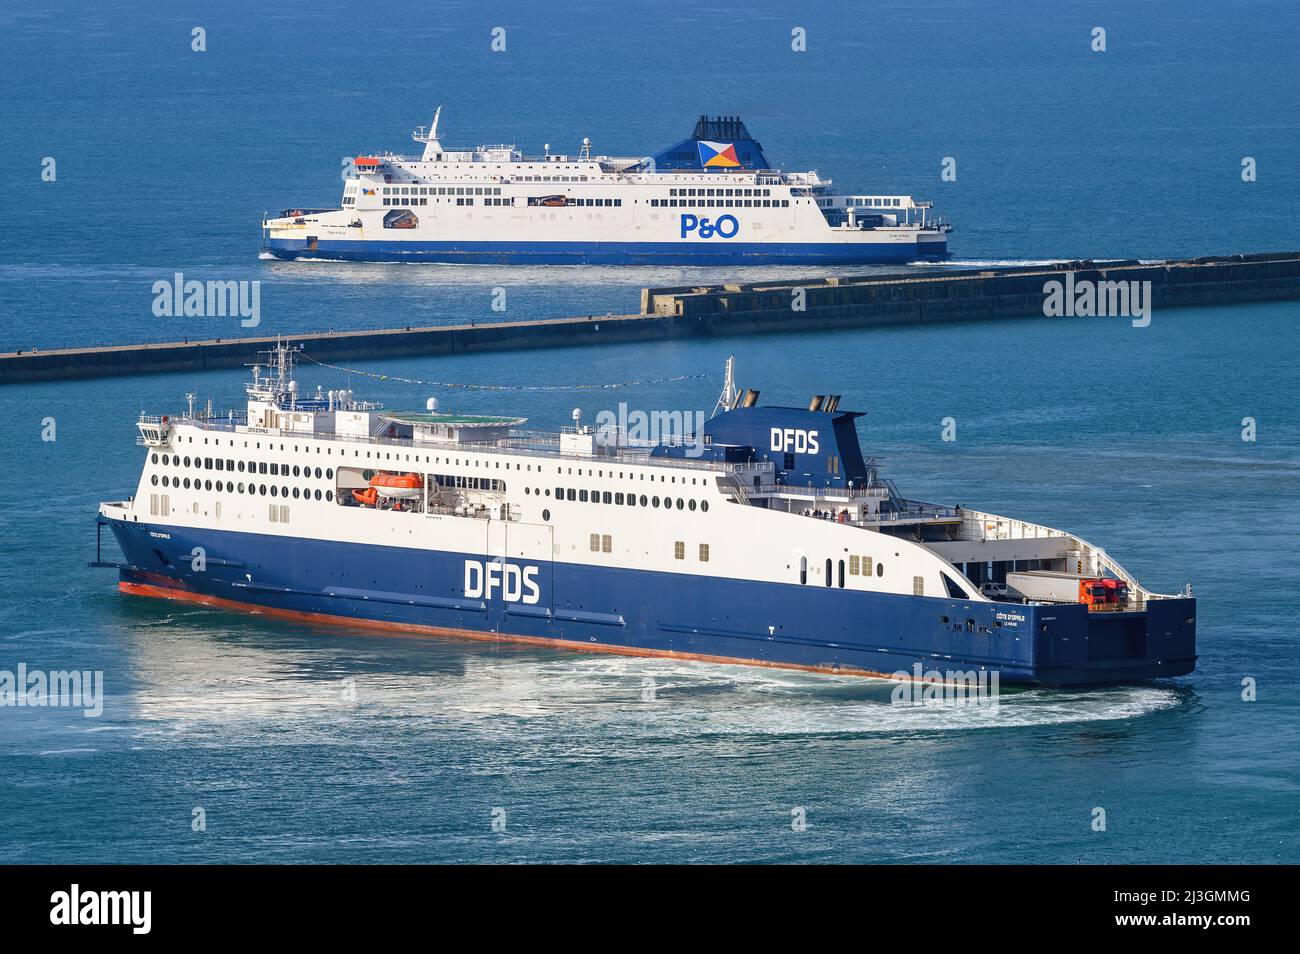 Cote D'Opale is an E-Flexer cross-Channel ferry operated by DFDS on the Dover - Calais route - August 2021. Stock Photo